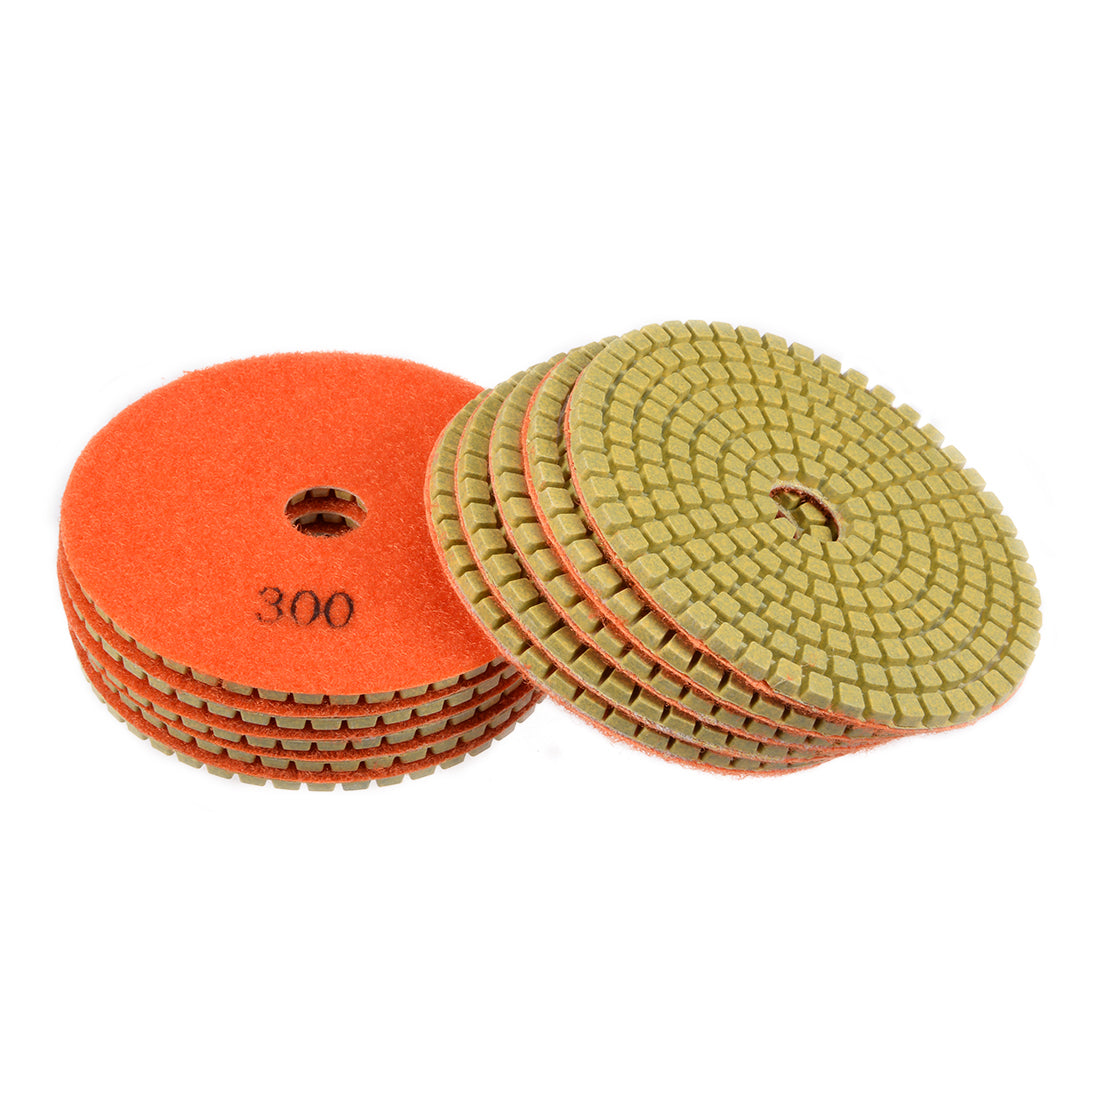 uxcell Uxcell Diamond Polishing Sanding Grinding Pads Discs 4 Inch Grit 300 10 Pcs for Granite Concrete Stone Marble